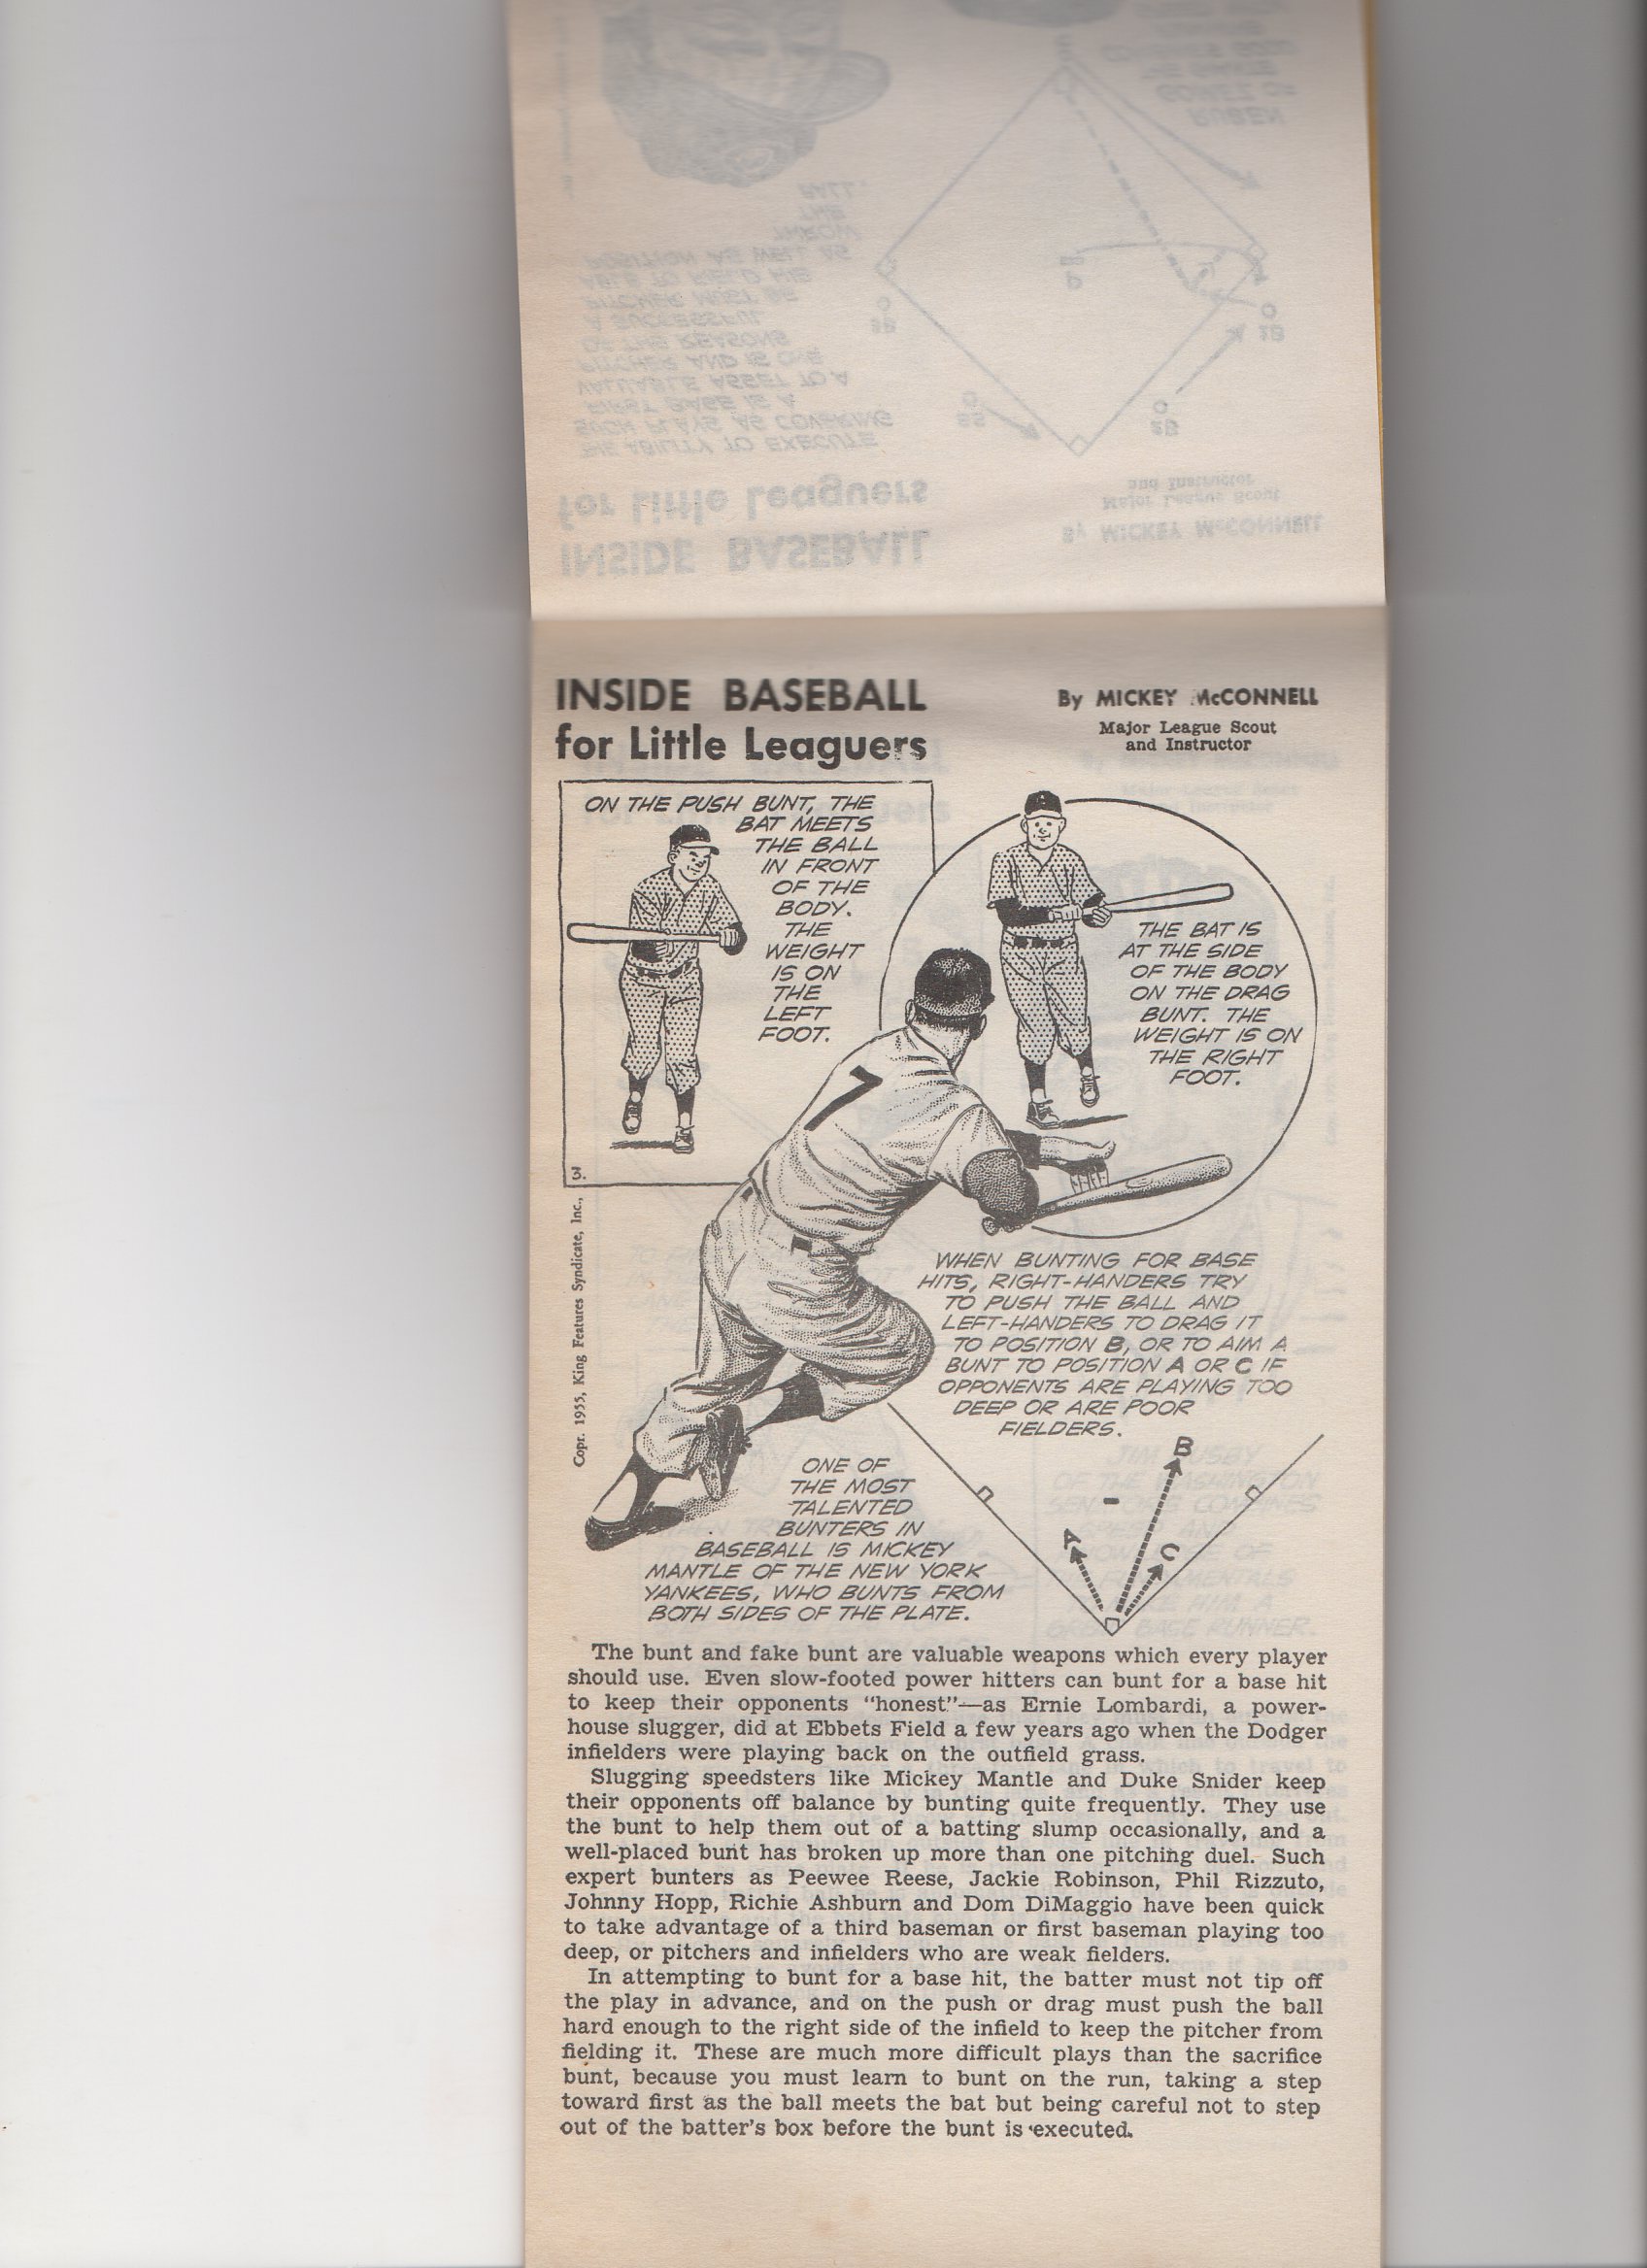 1955 oregon journal, baseball for the youngster pamphlet